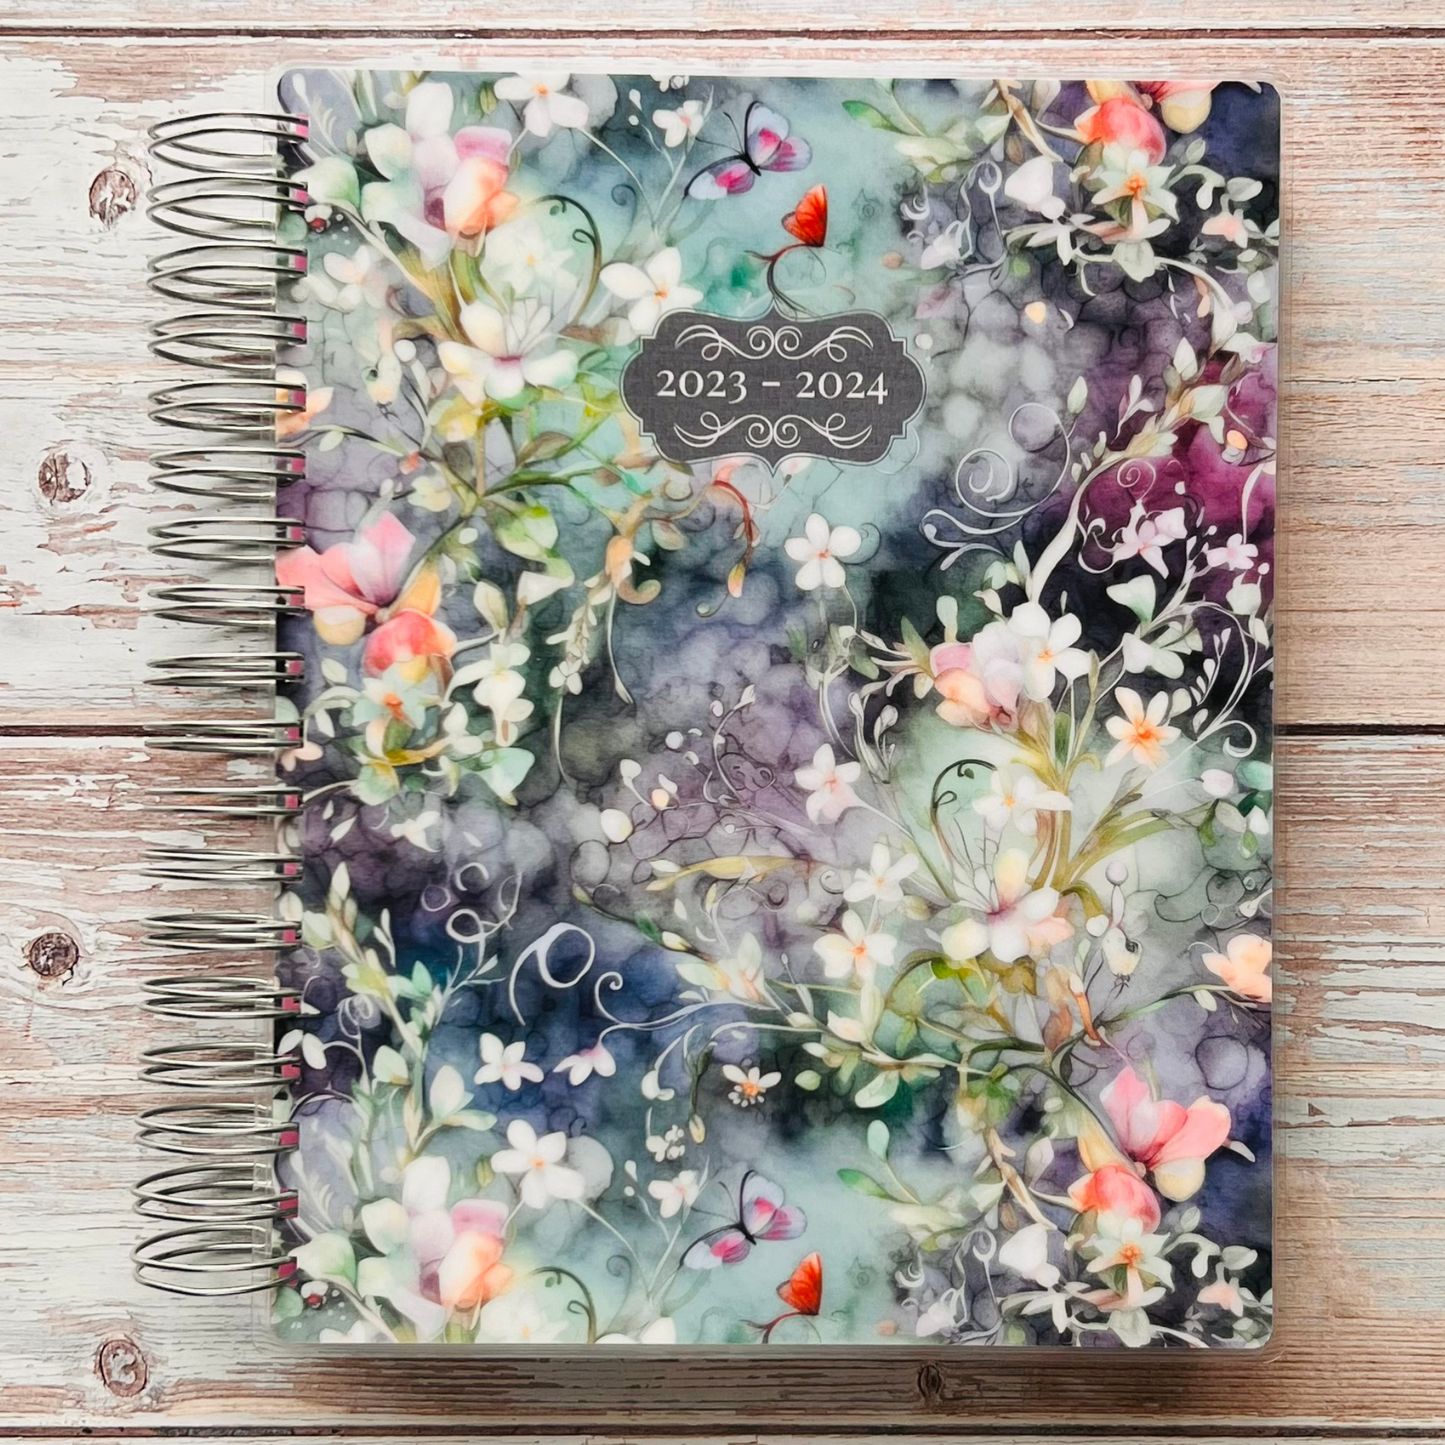 2023-2024 Personalized Monthly Planner - Magical Garden Monthly Planners Artful Planner Co. July-2023 20 Meal Planner Pages added to back +$3.00 